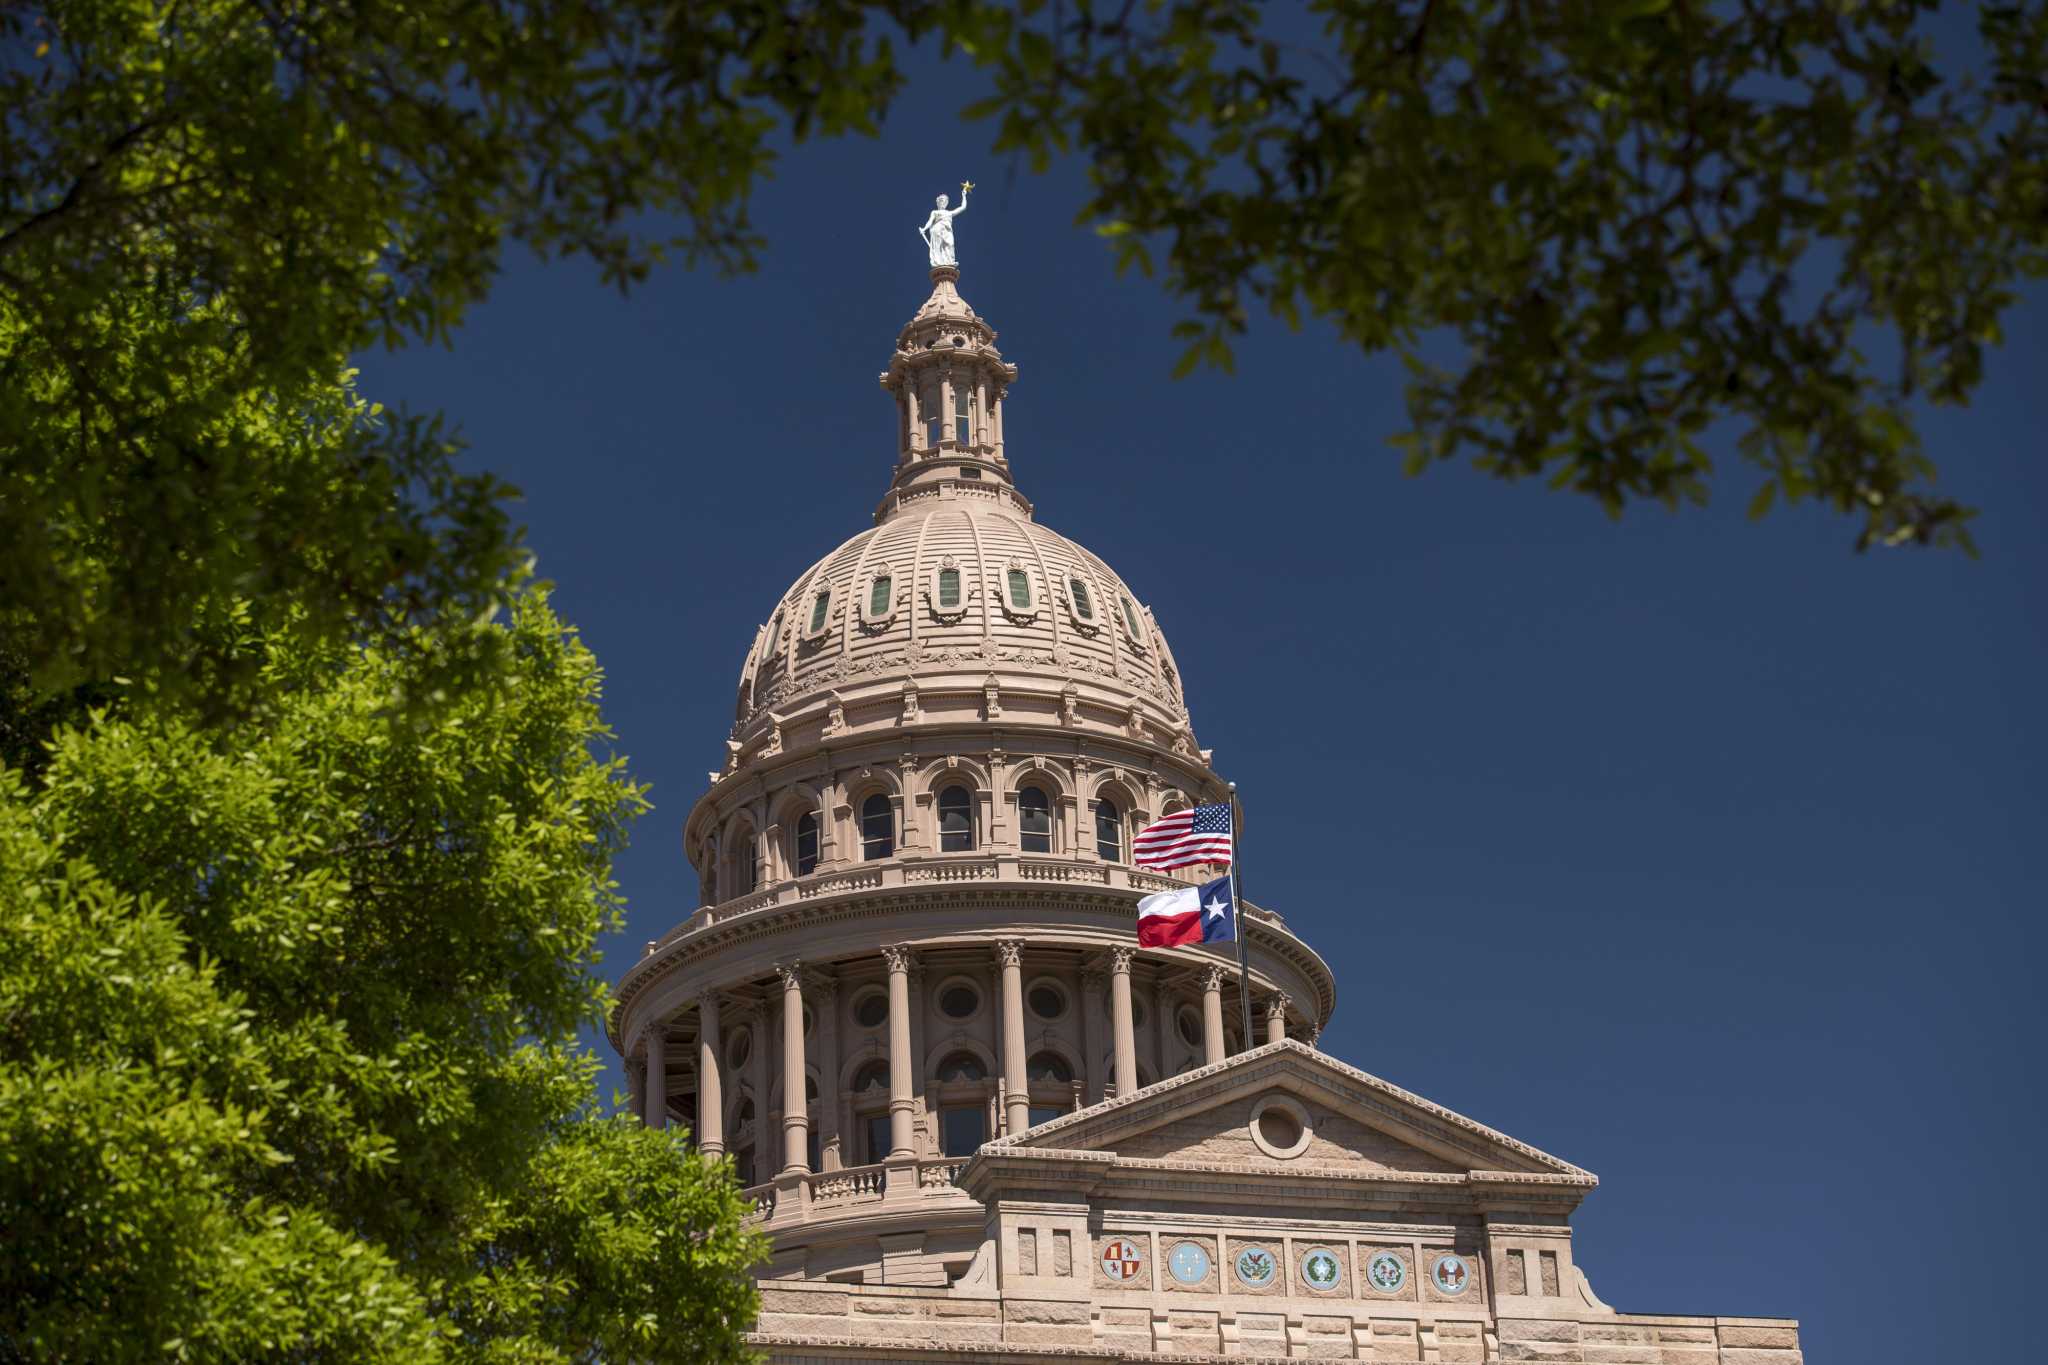 Texas Rainy Day funds has huge role to pay going forward [Opinion]